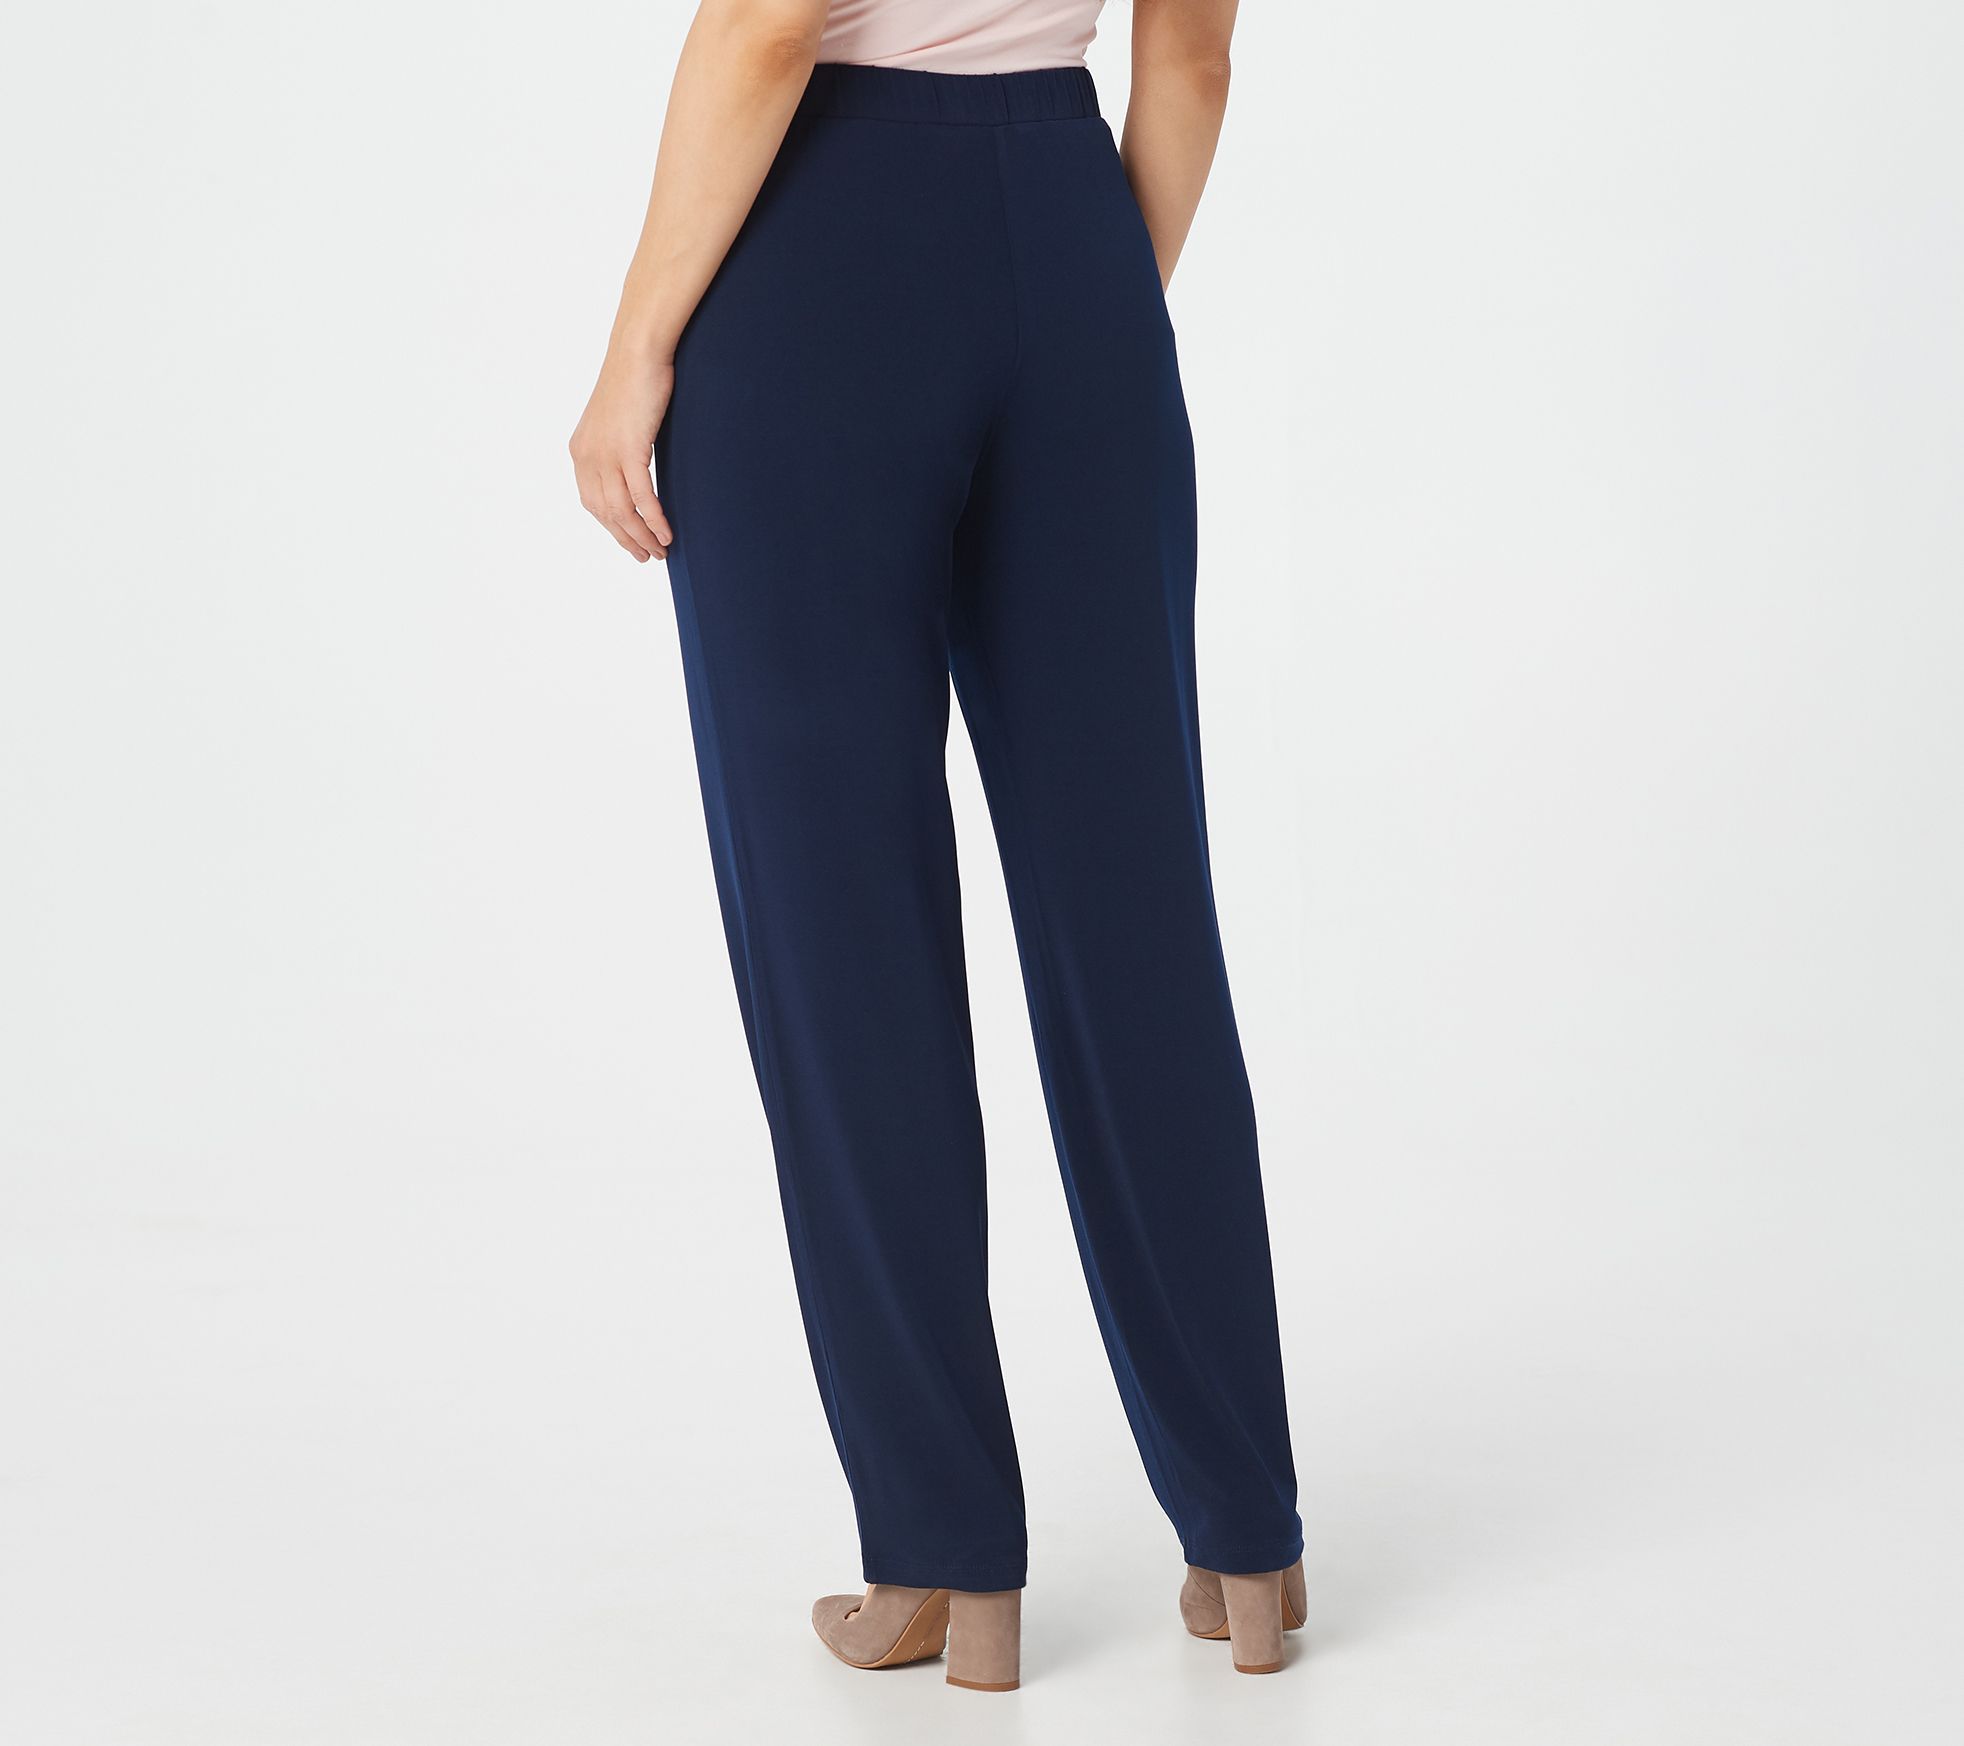 Every Day by Susan Graver Petite Liquid Knit Pull-On Pants - QVC.com